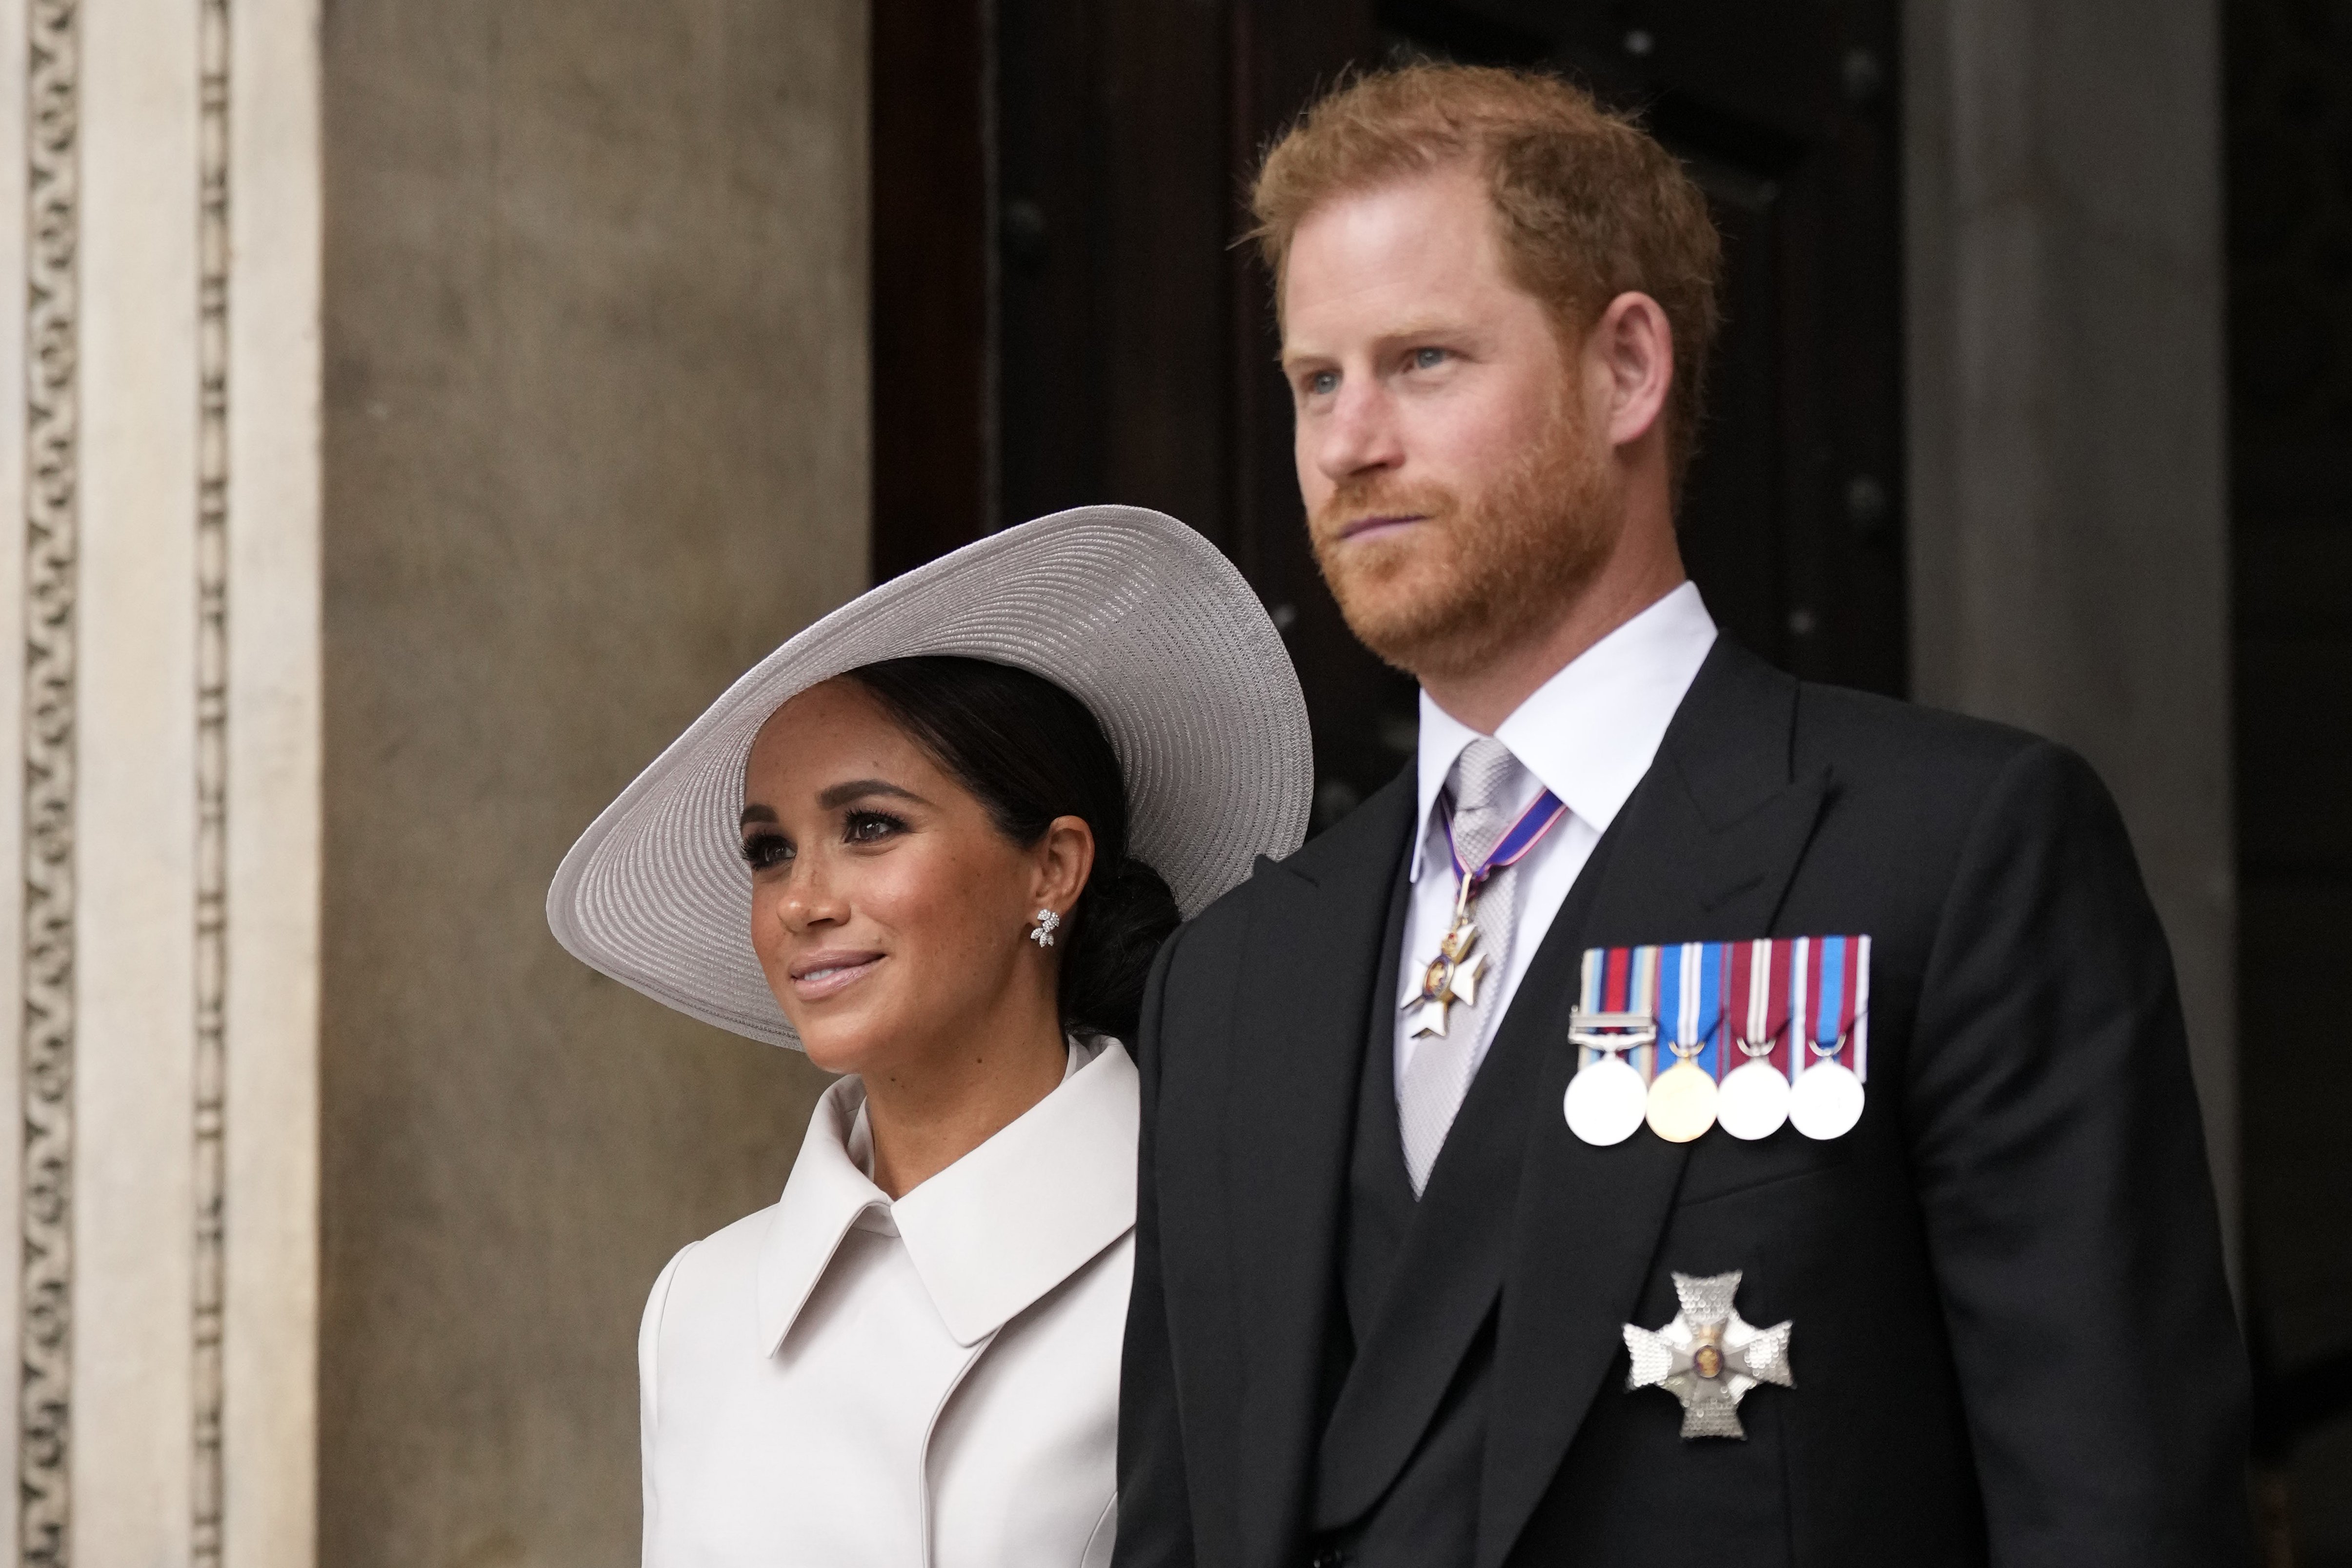 Duchess Meghan and Prince Harry leave after a service of thanksgiving for the reign of Queen Elizabeth II in London, on June 3, 2022. | Source: Getty Images